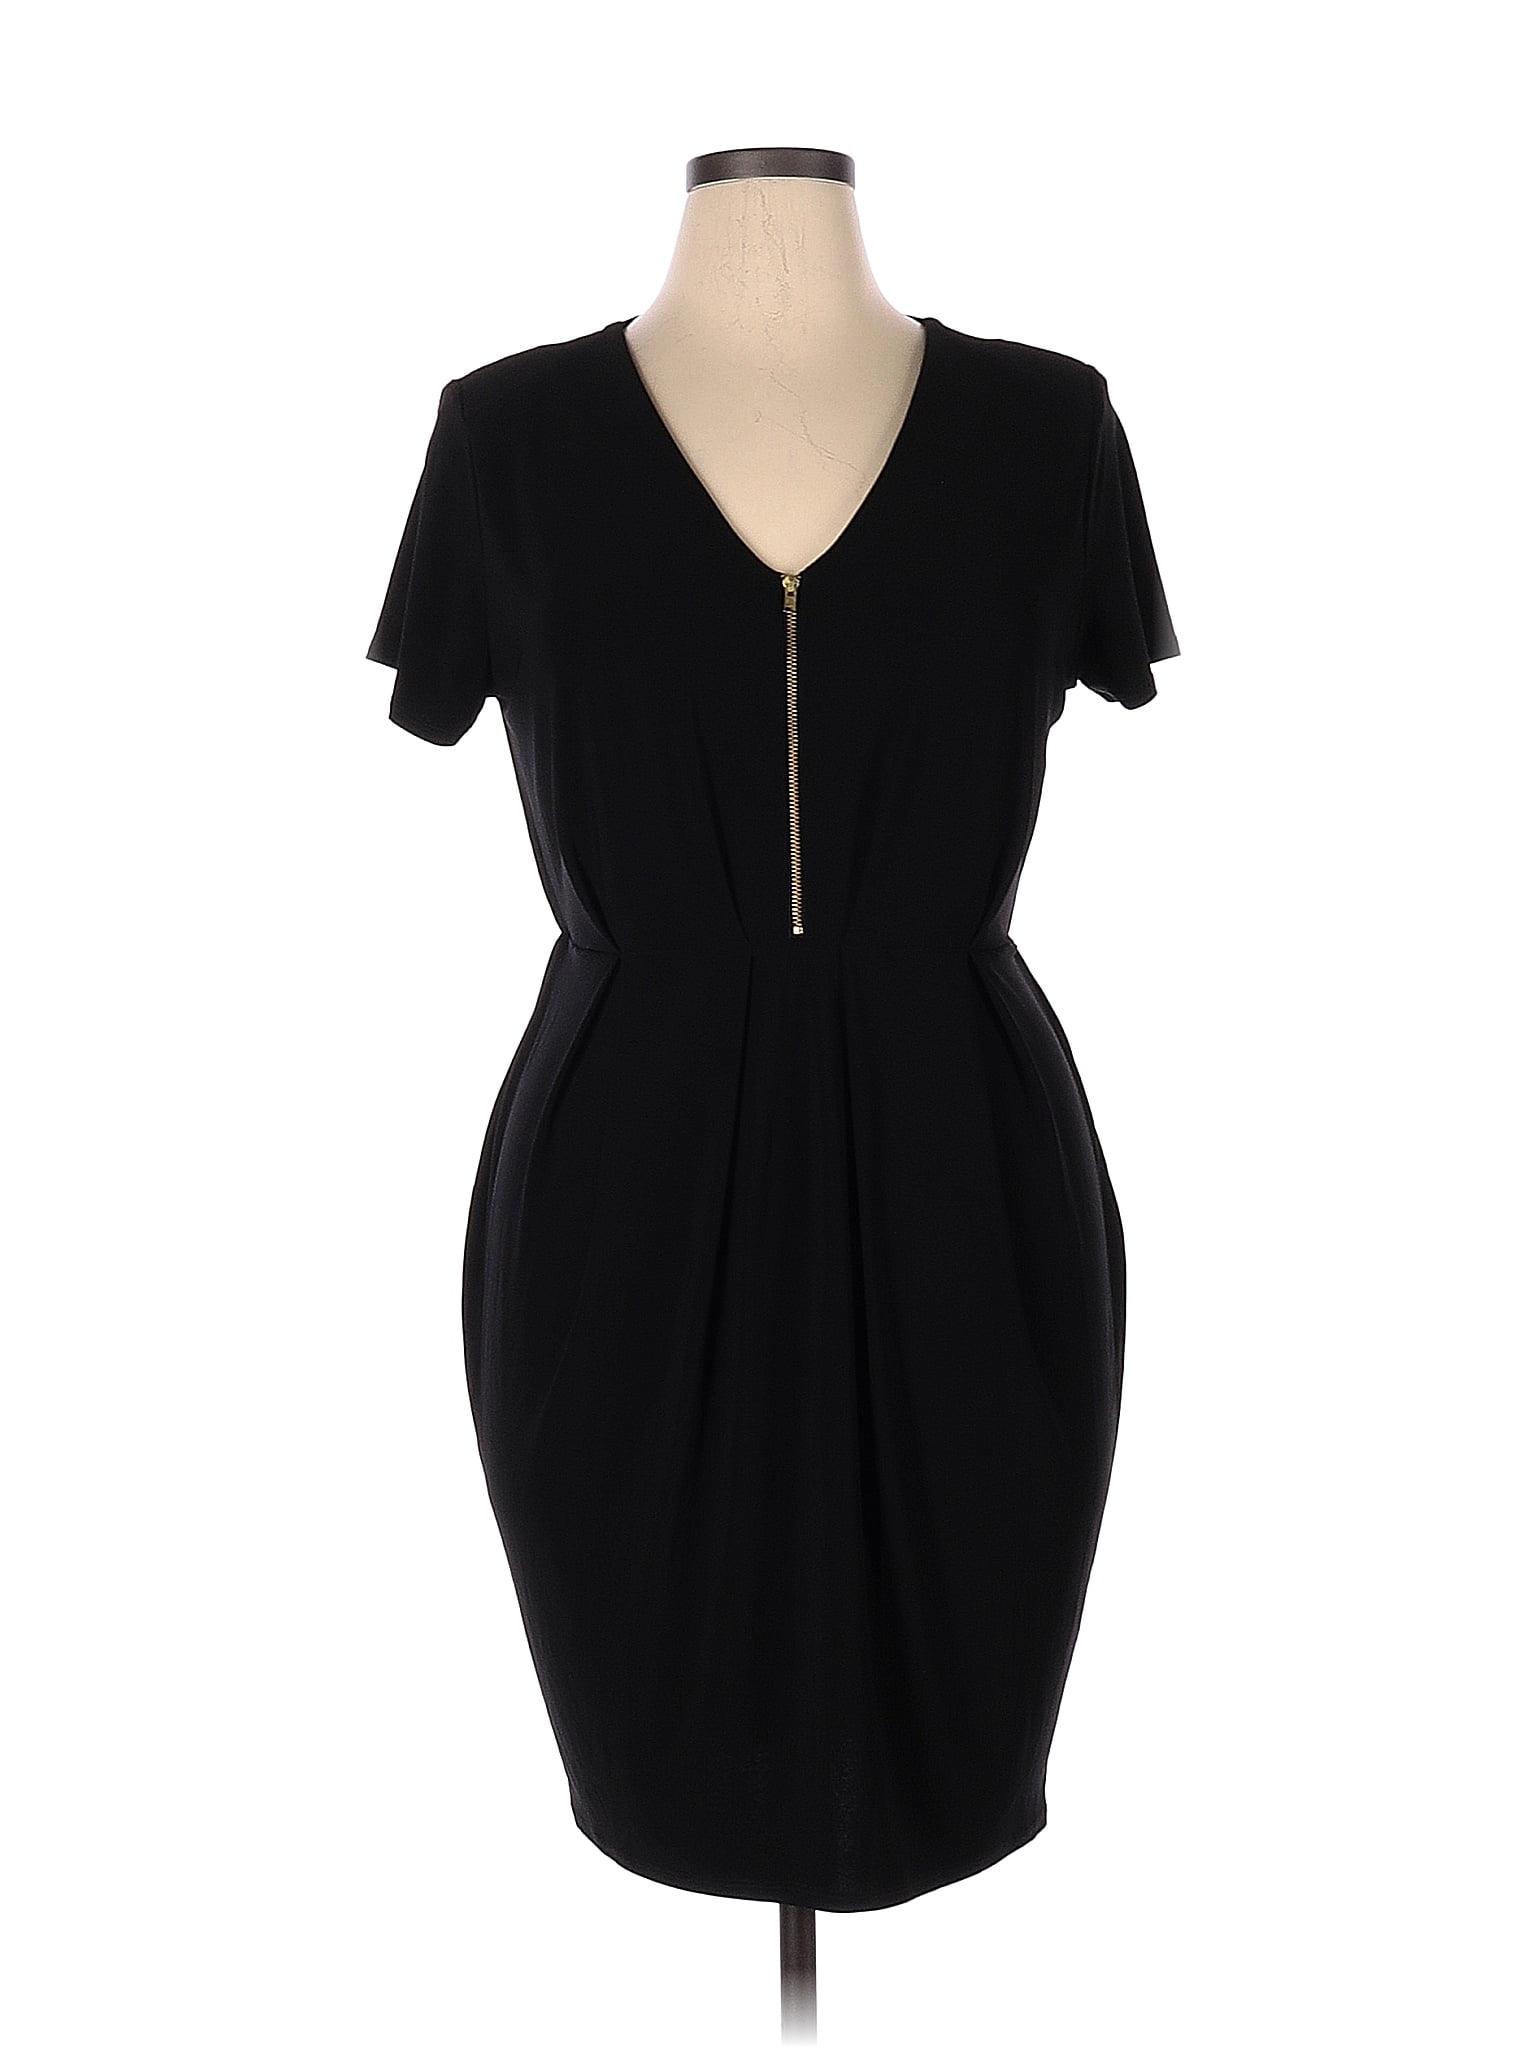 F&F Clothing Women's Dresses On Sale Up To 90% Off Retail